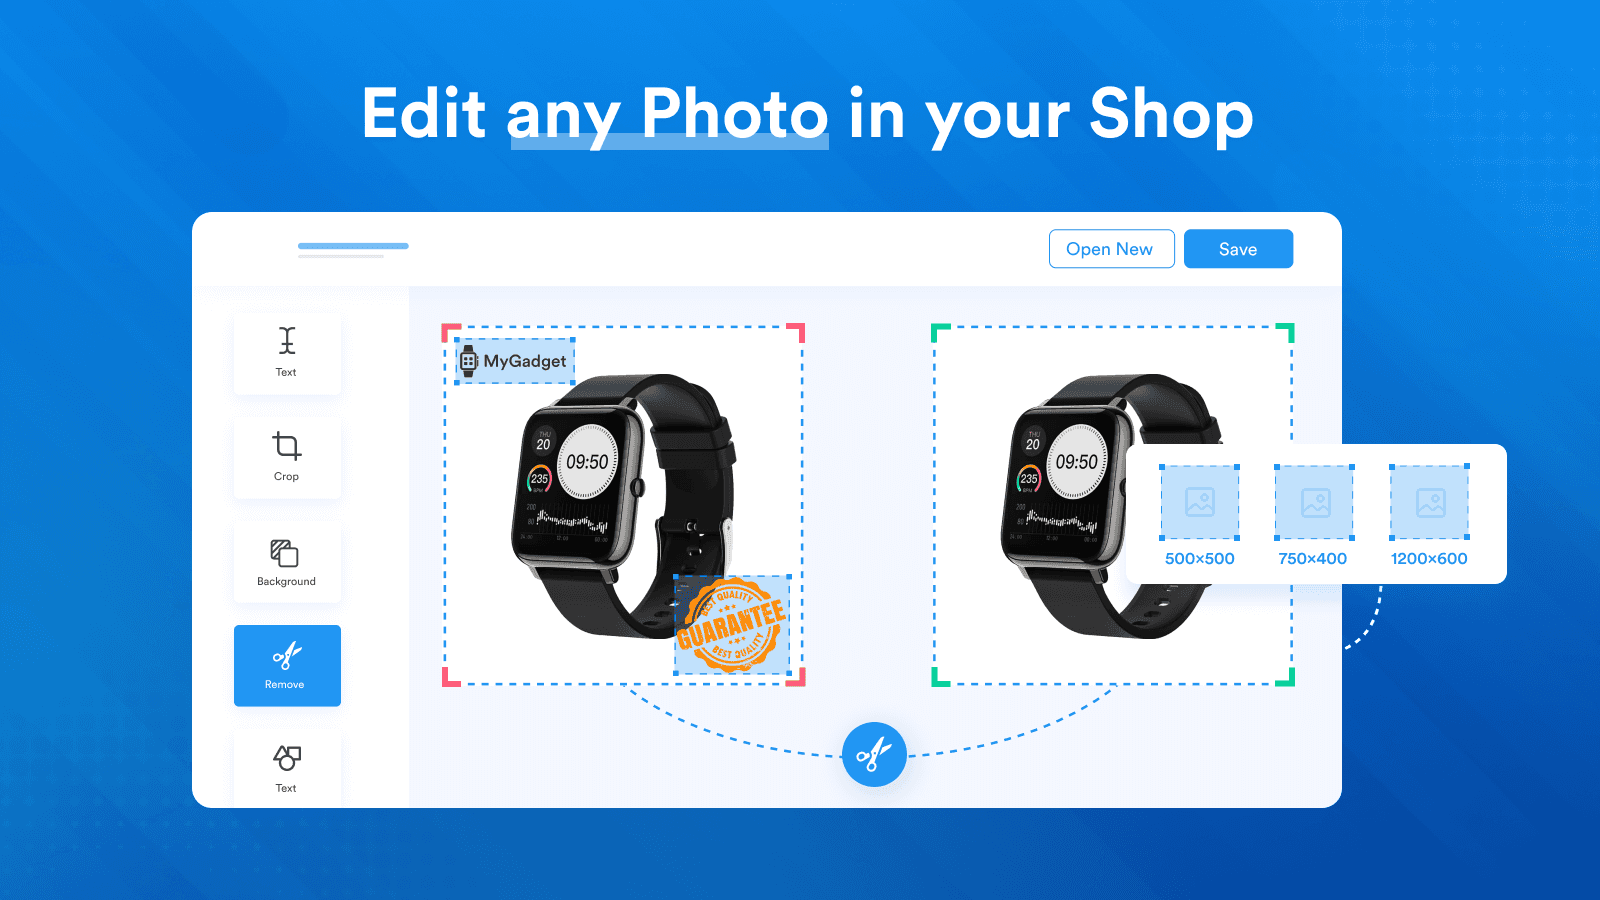 Edit any photo in your shop